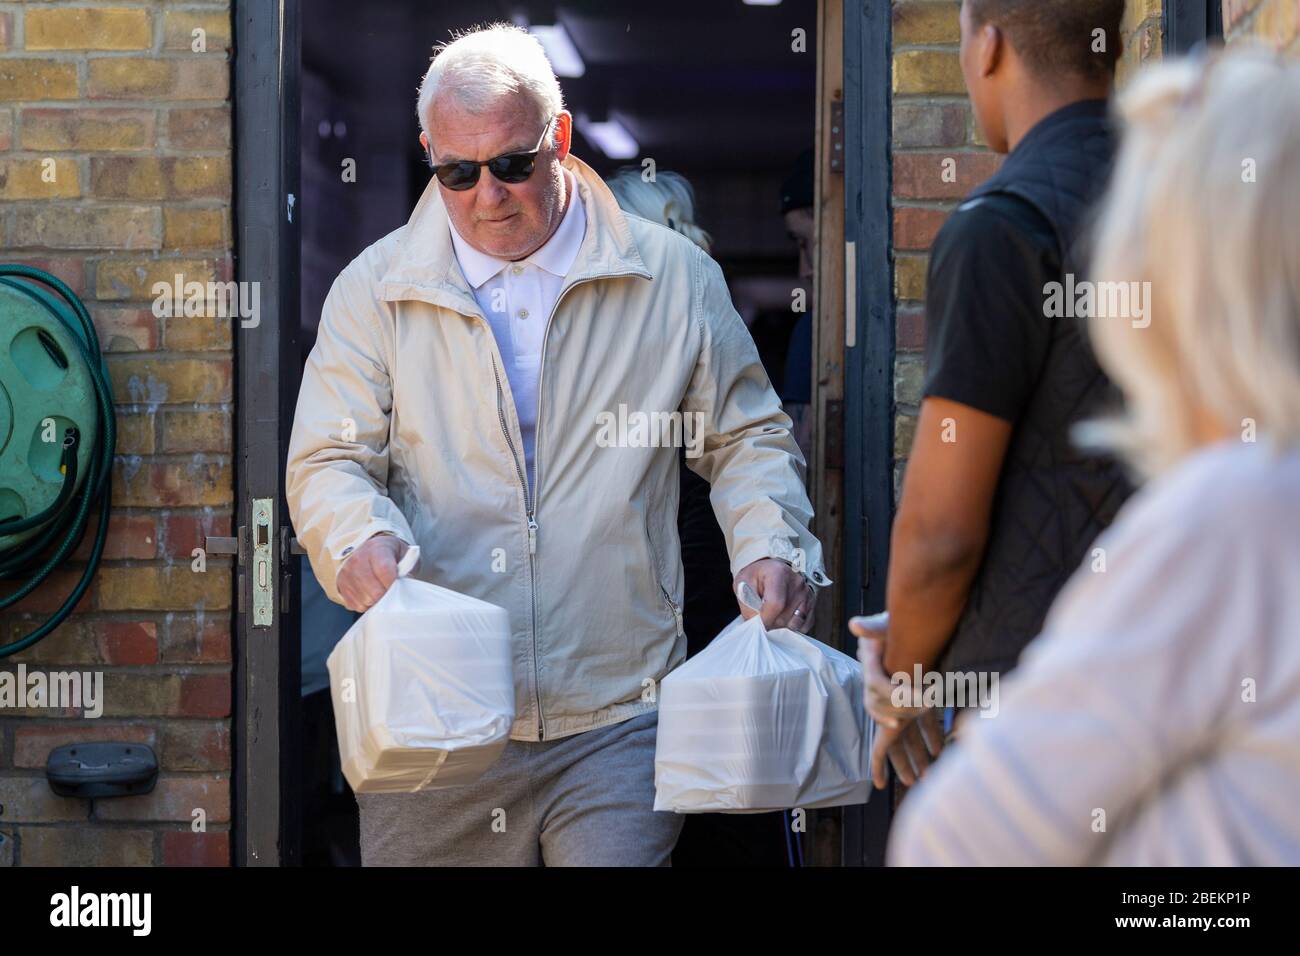 Brentwood, Essex, UK. 14th April 2020. Dusk restaurant in Brentwood, Essex, prepares free meals for NHS frontline workers which are distributed across hospitals by volunteers. Credit: Ricci Fothergill/Alamy Live News Stock Photo